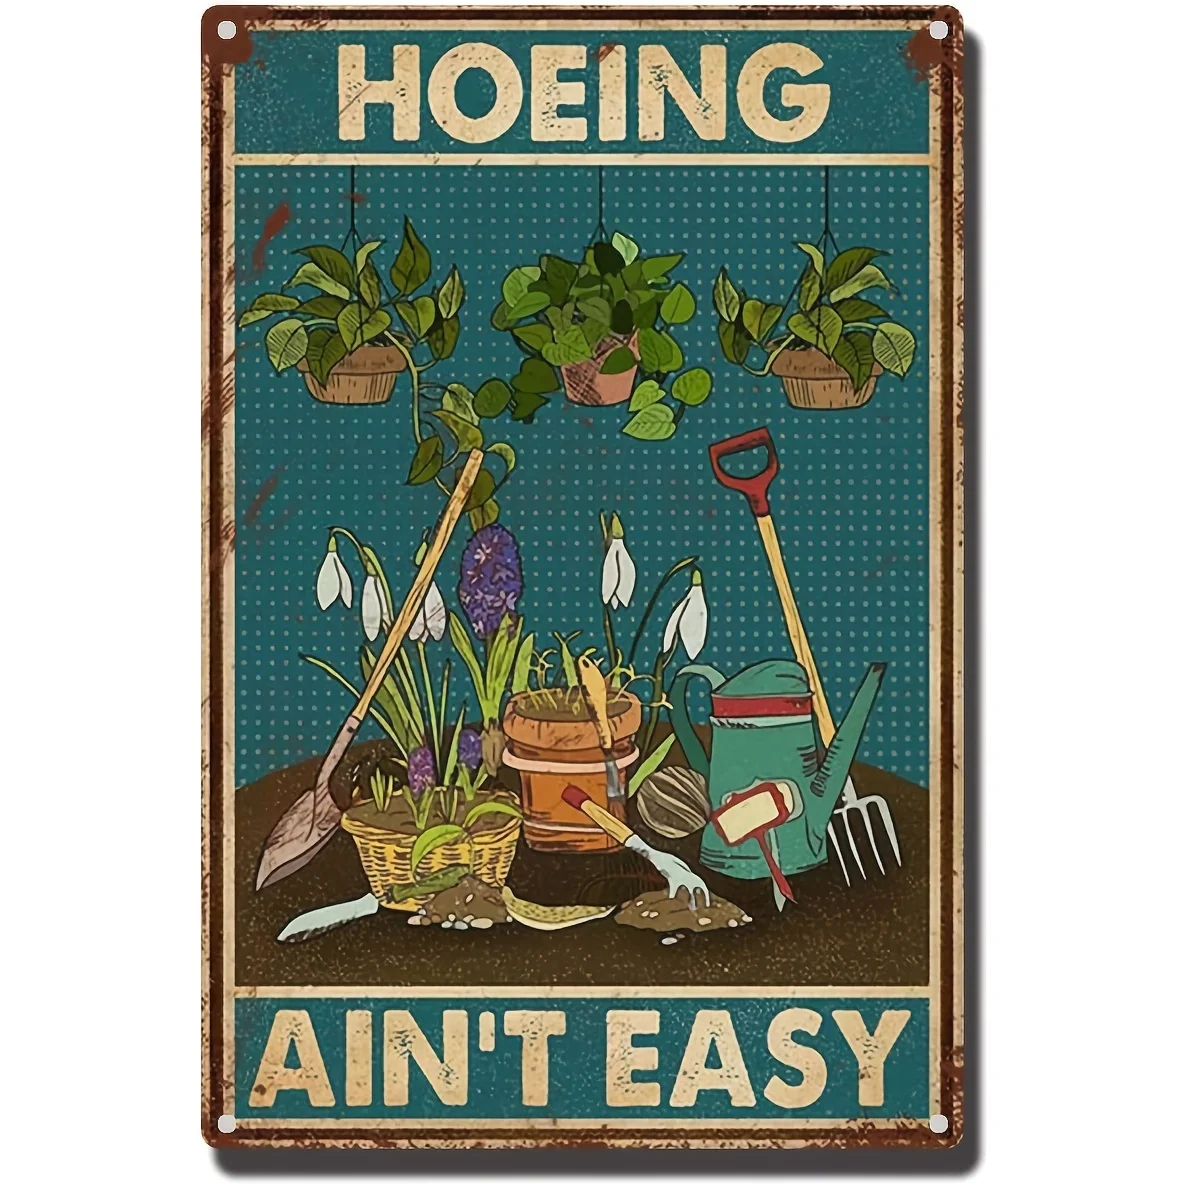 

Tin Sign Hoeing Ain't Easy Gardening Garden For Toilet Restroom Home Decor Gifts 12x8in